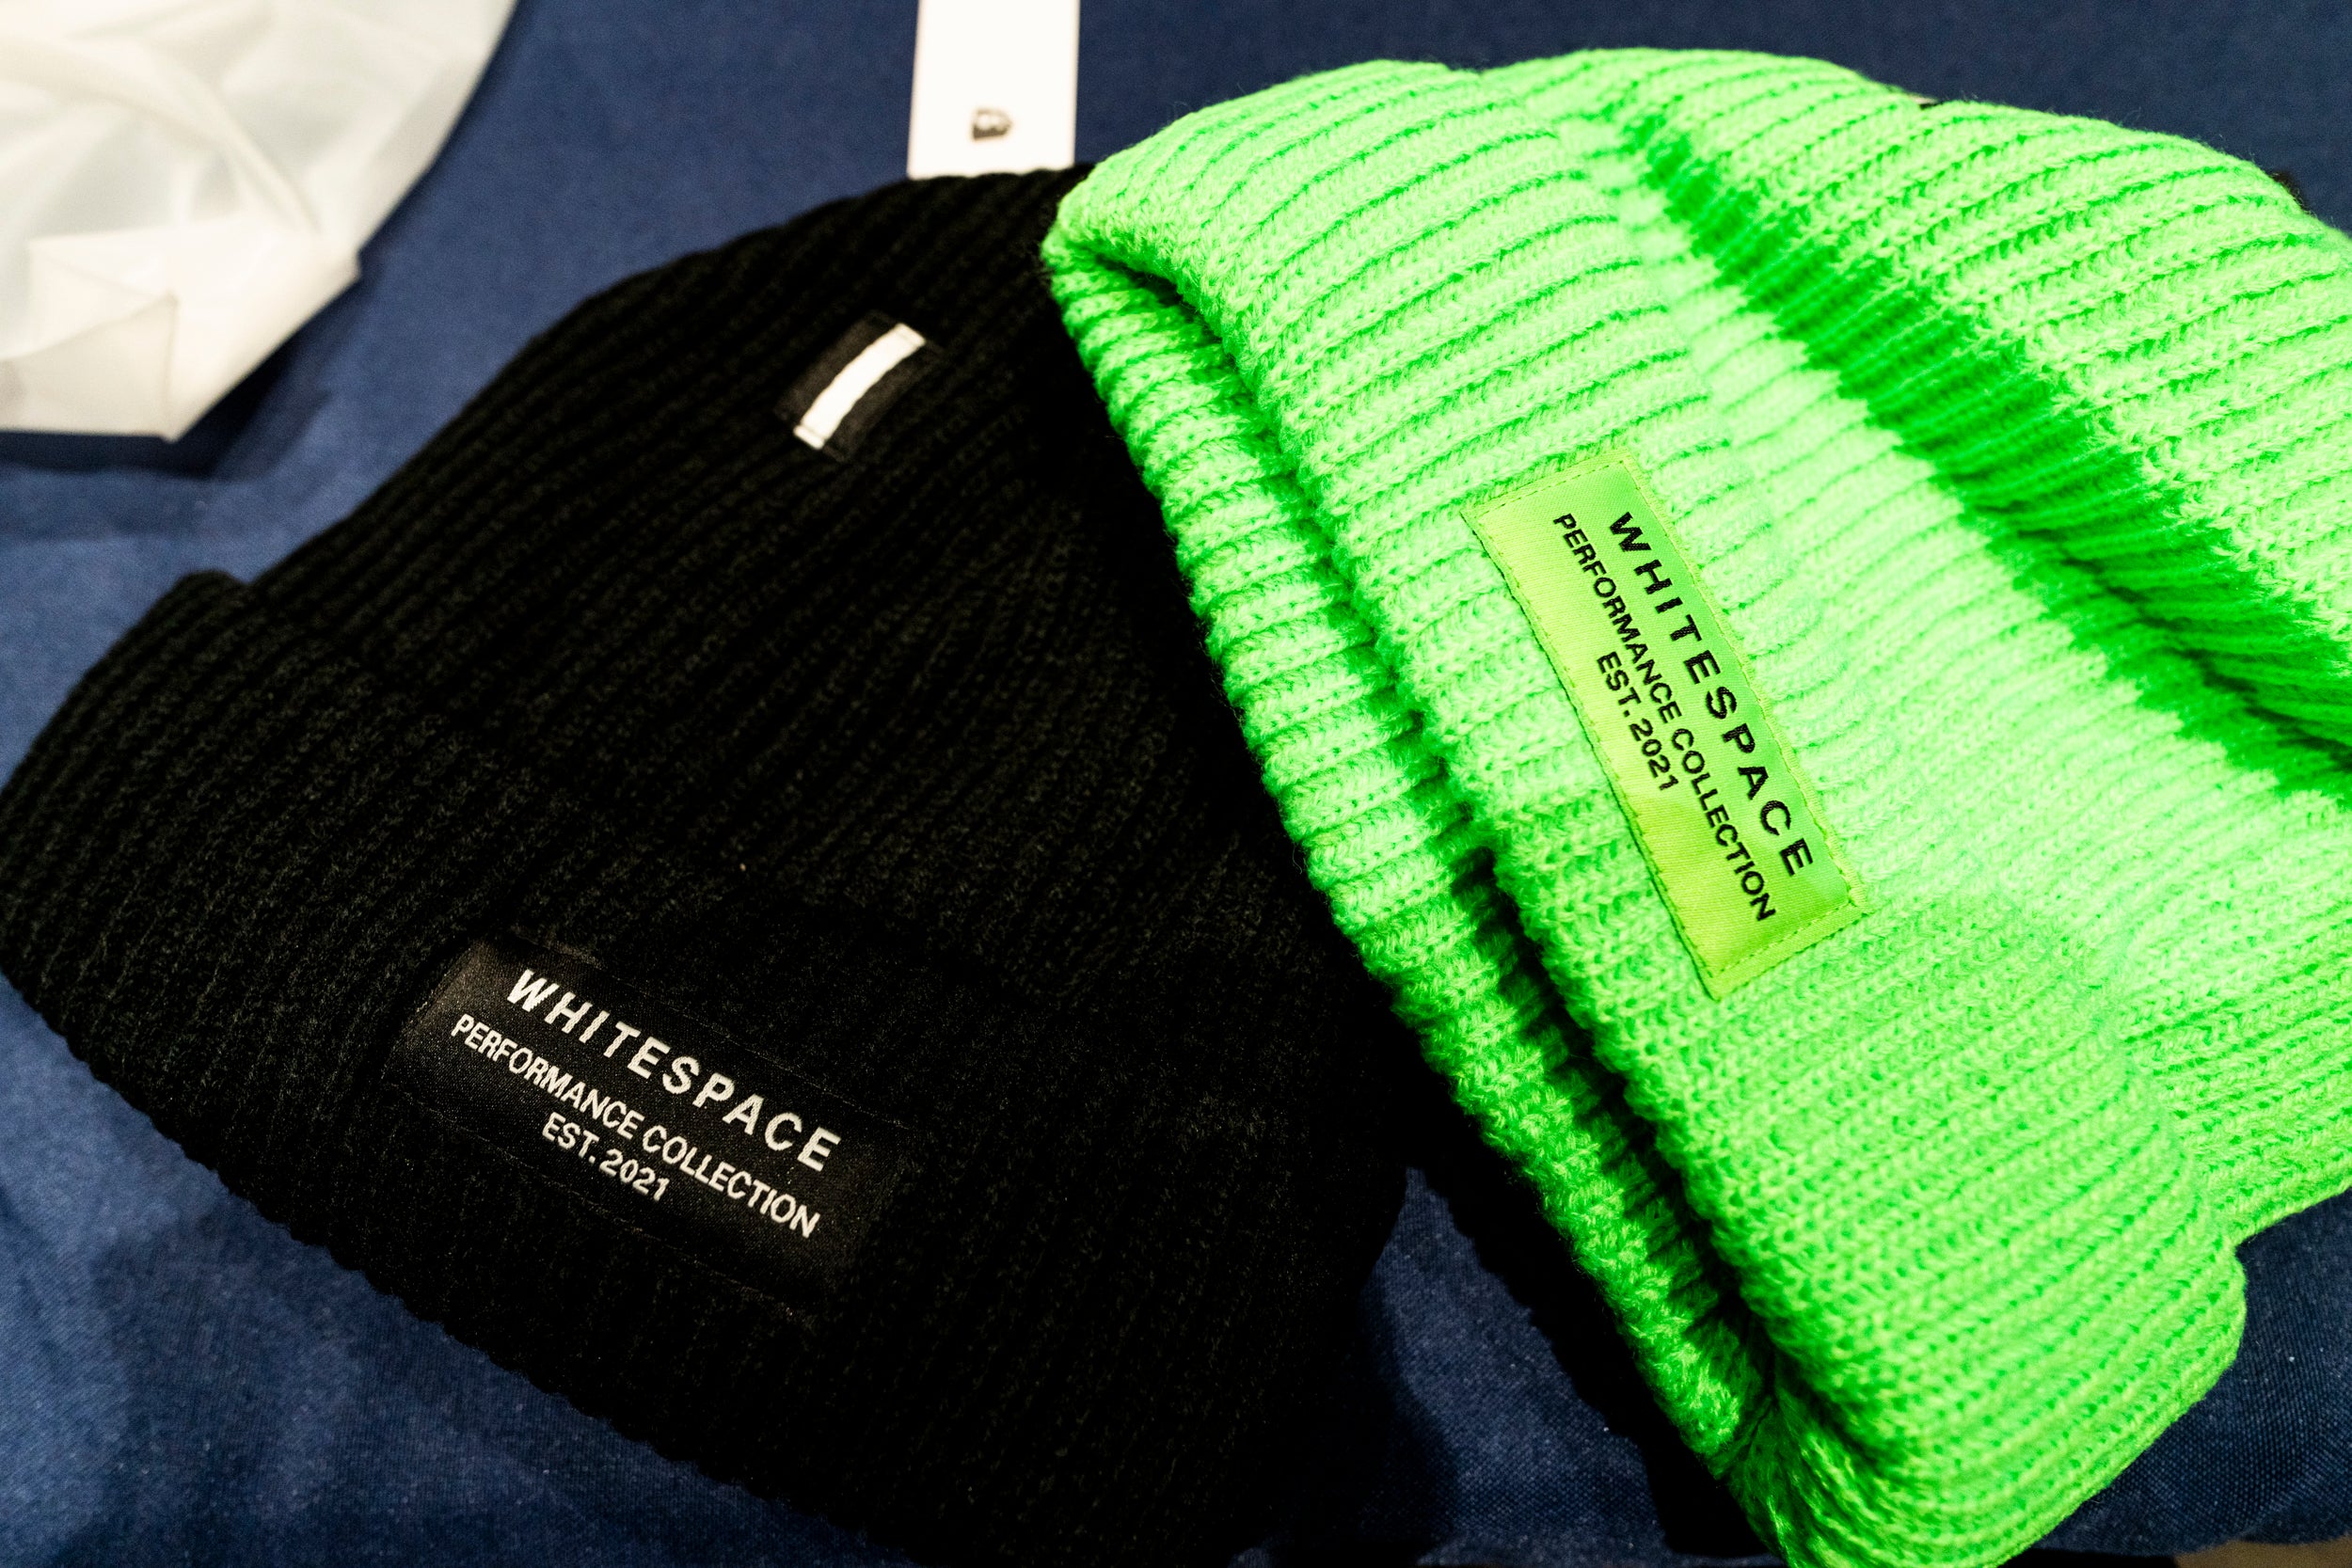 A black and a bright neon green beanie from the limited edition WHITESPACE and Shopify collaboration.